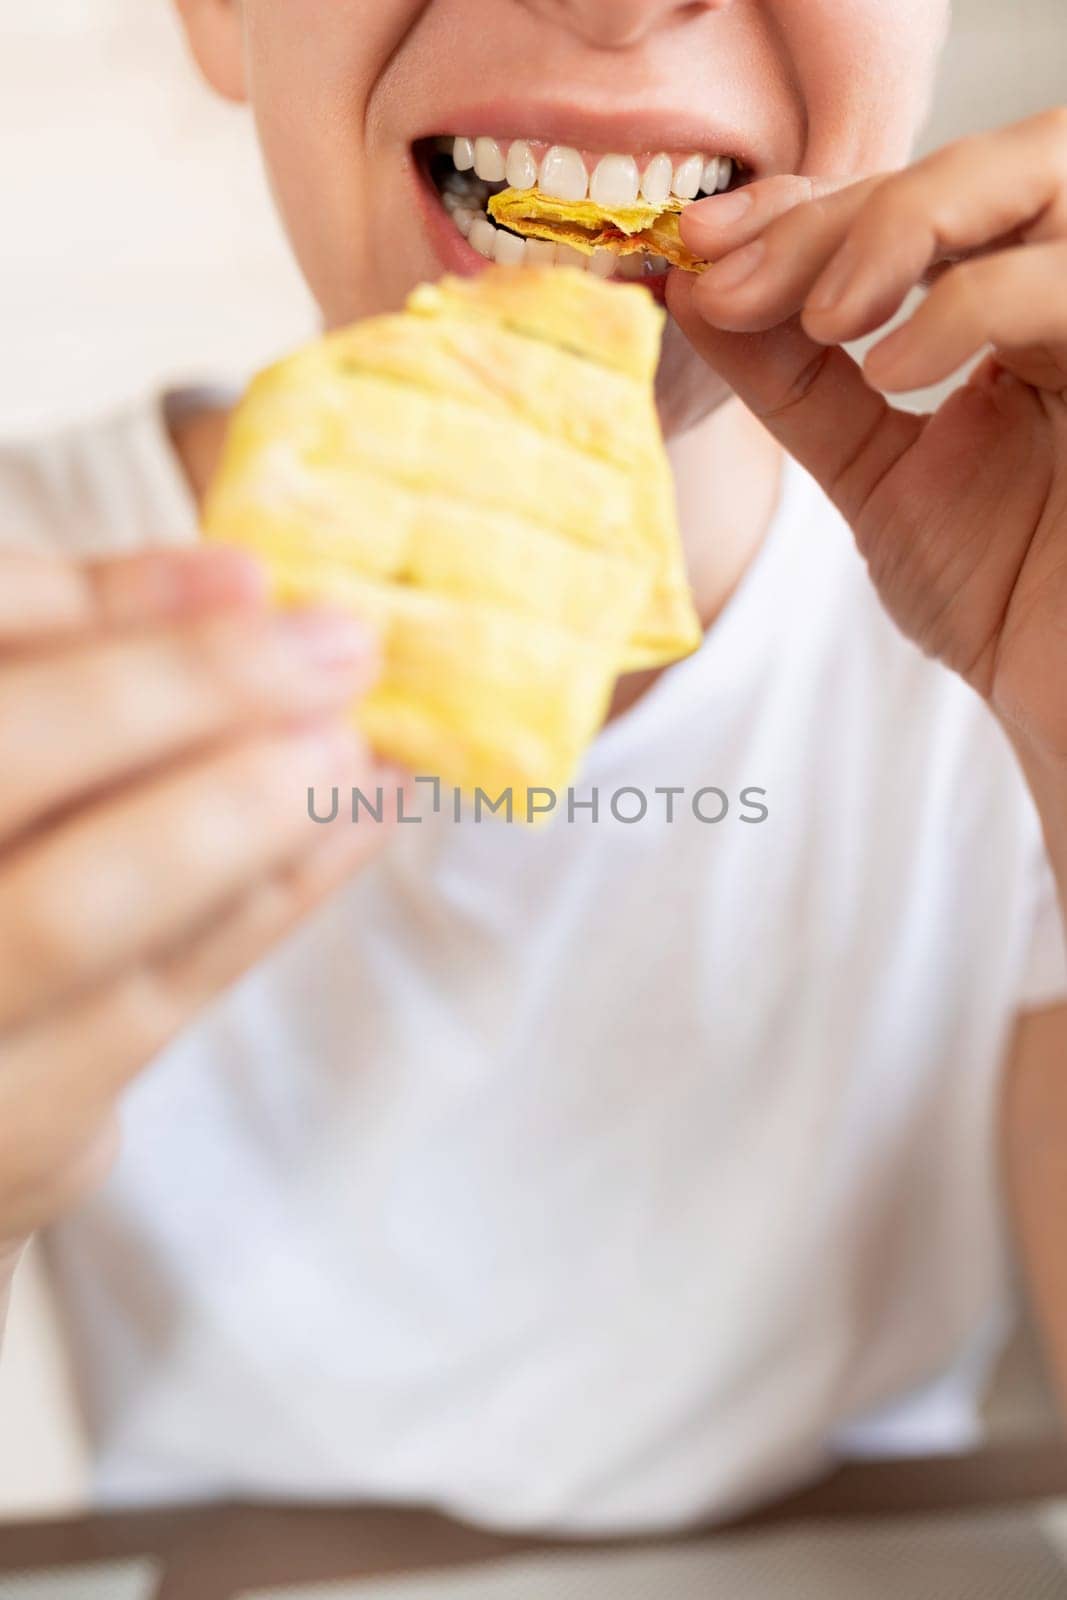 young woman taking a bite of homemade fast food.